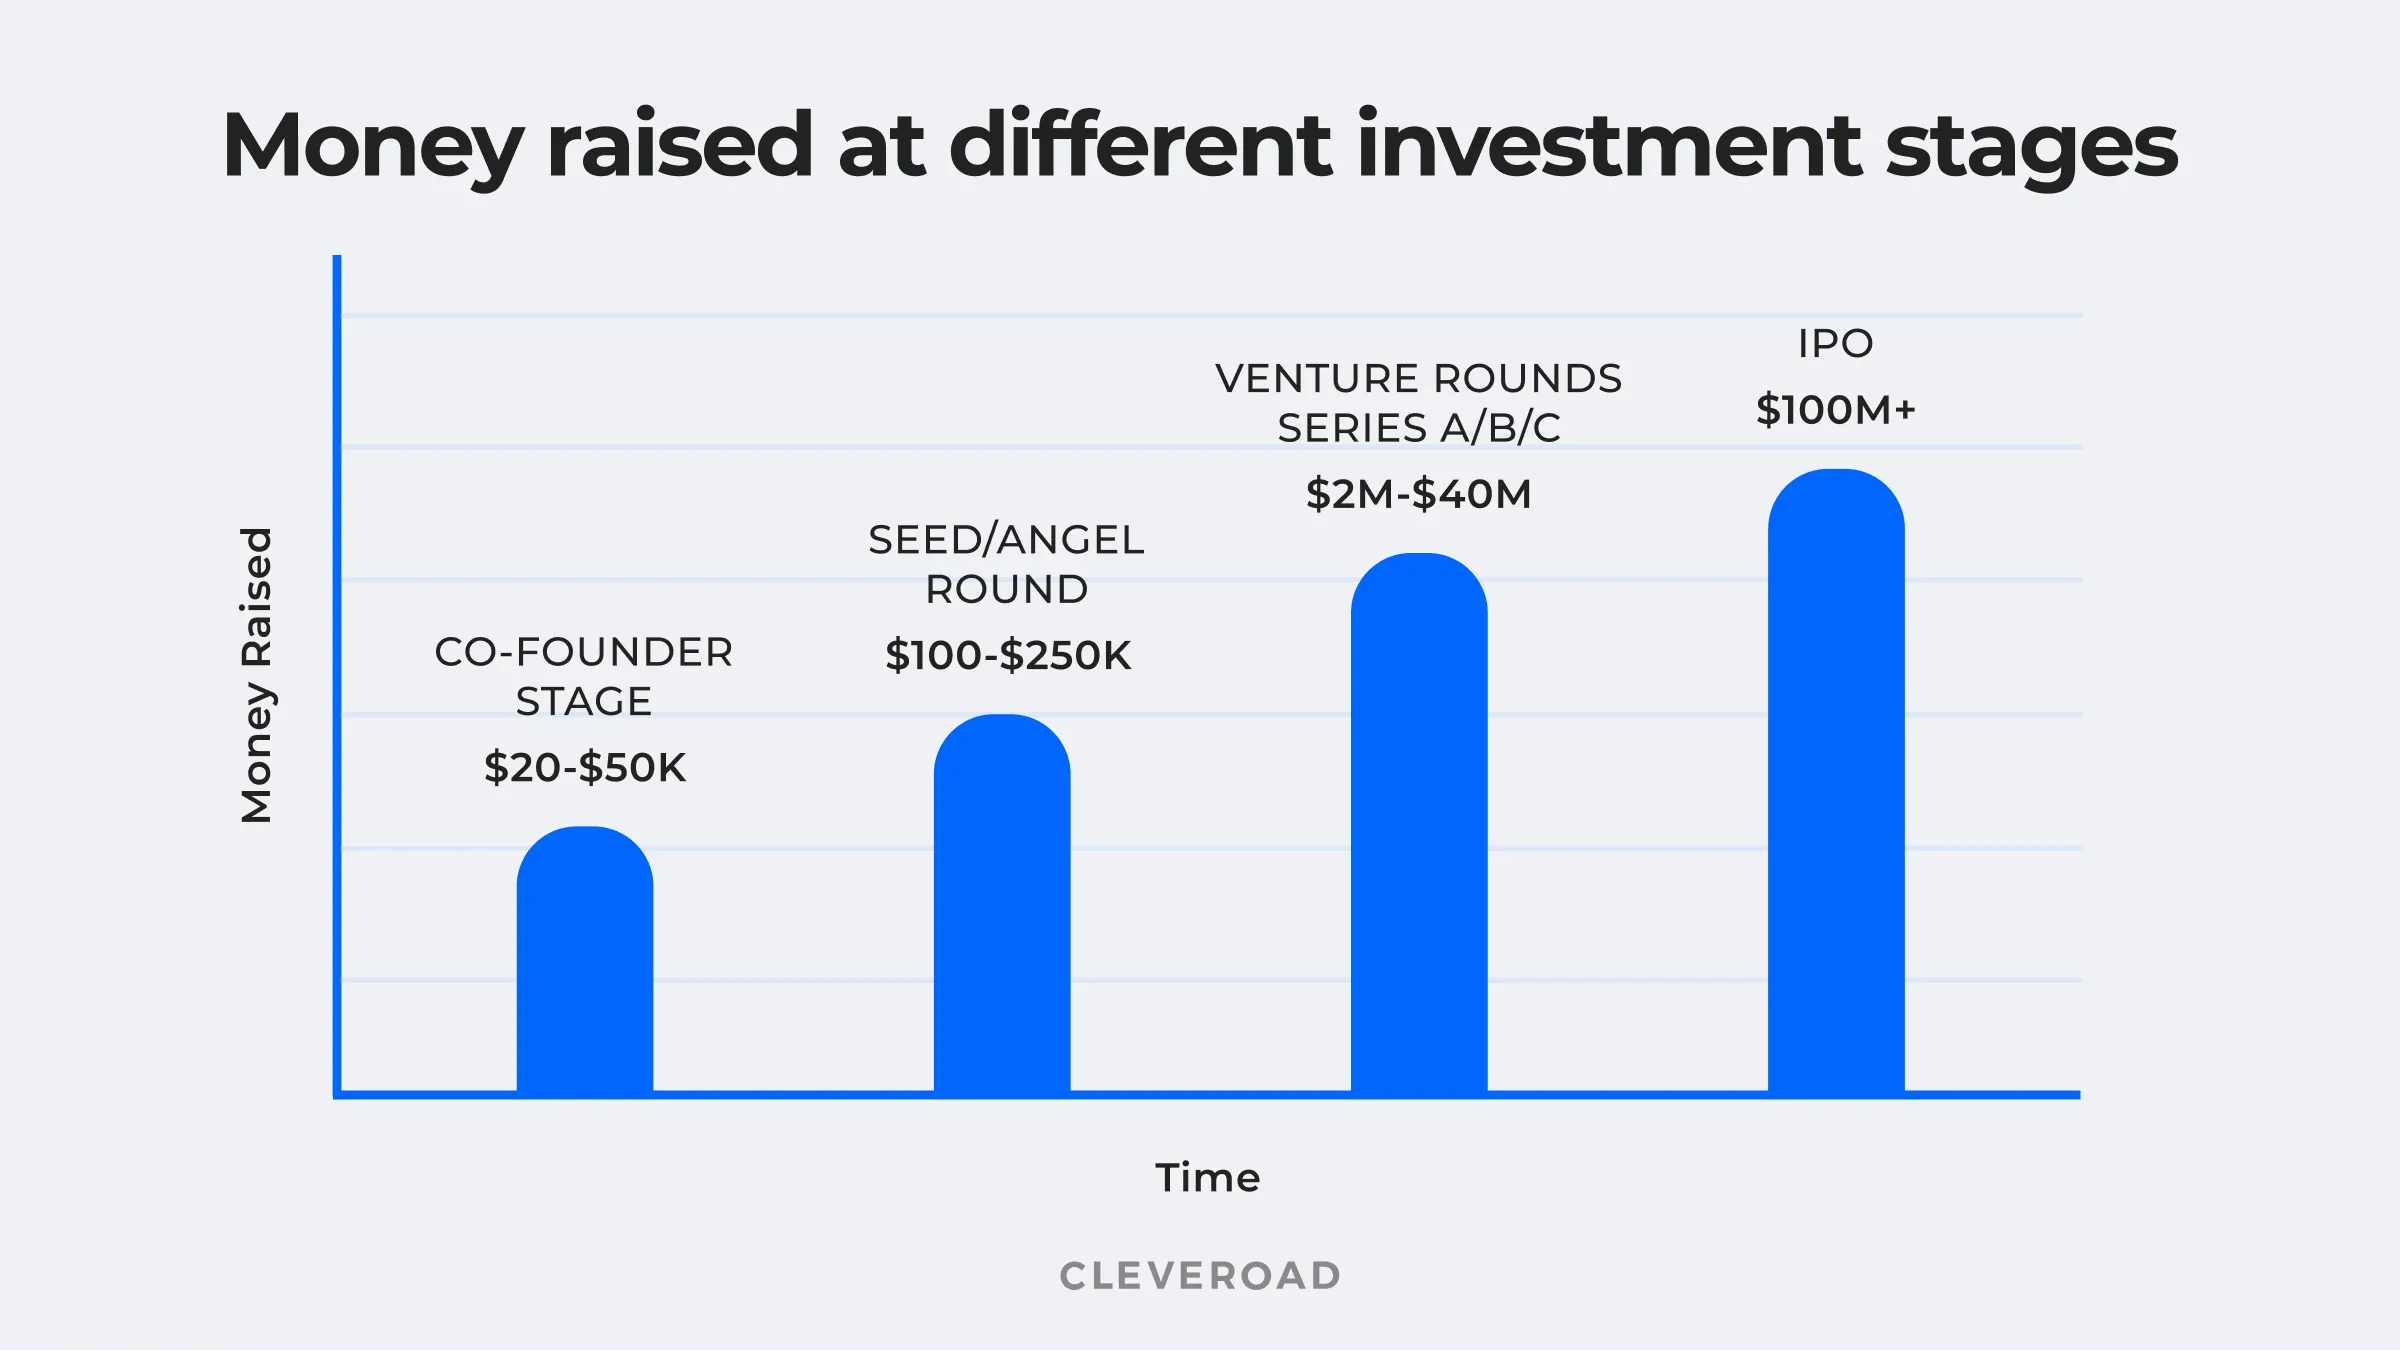 Money raised at different funding stages